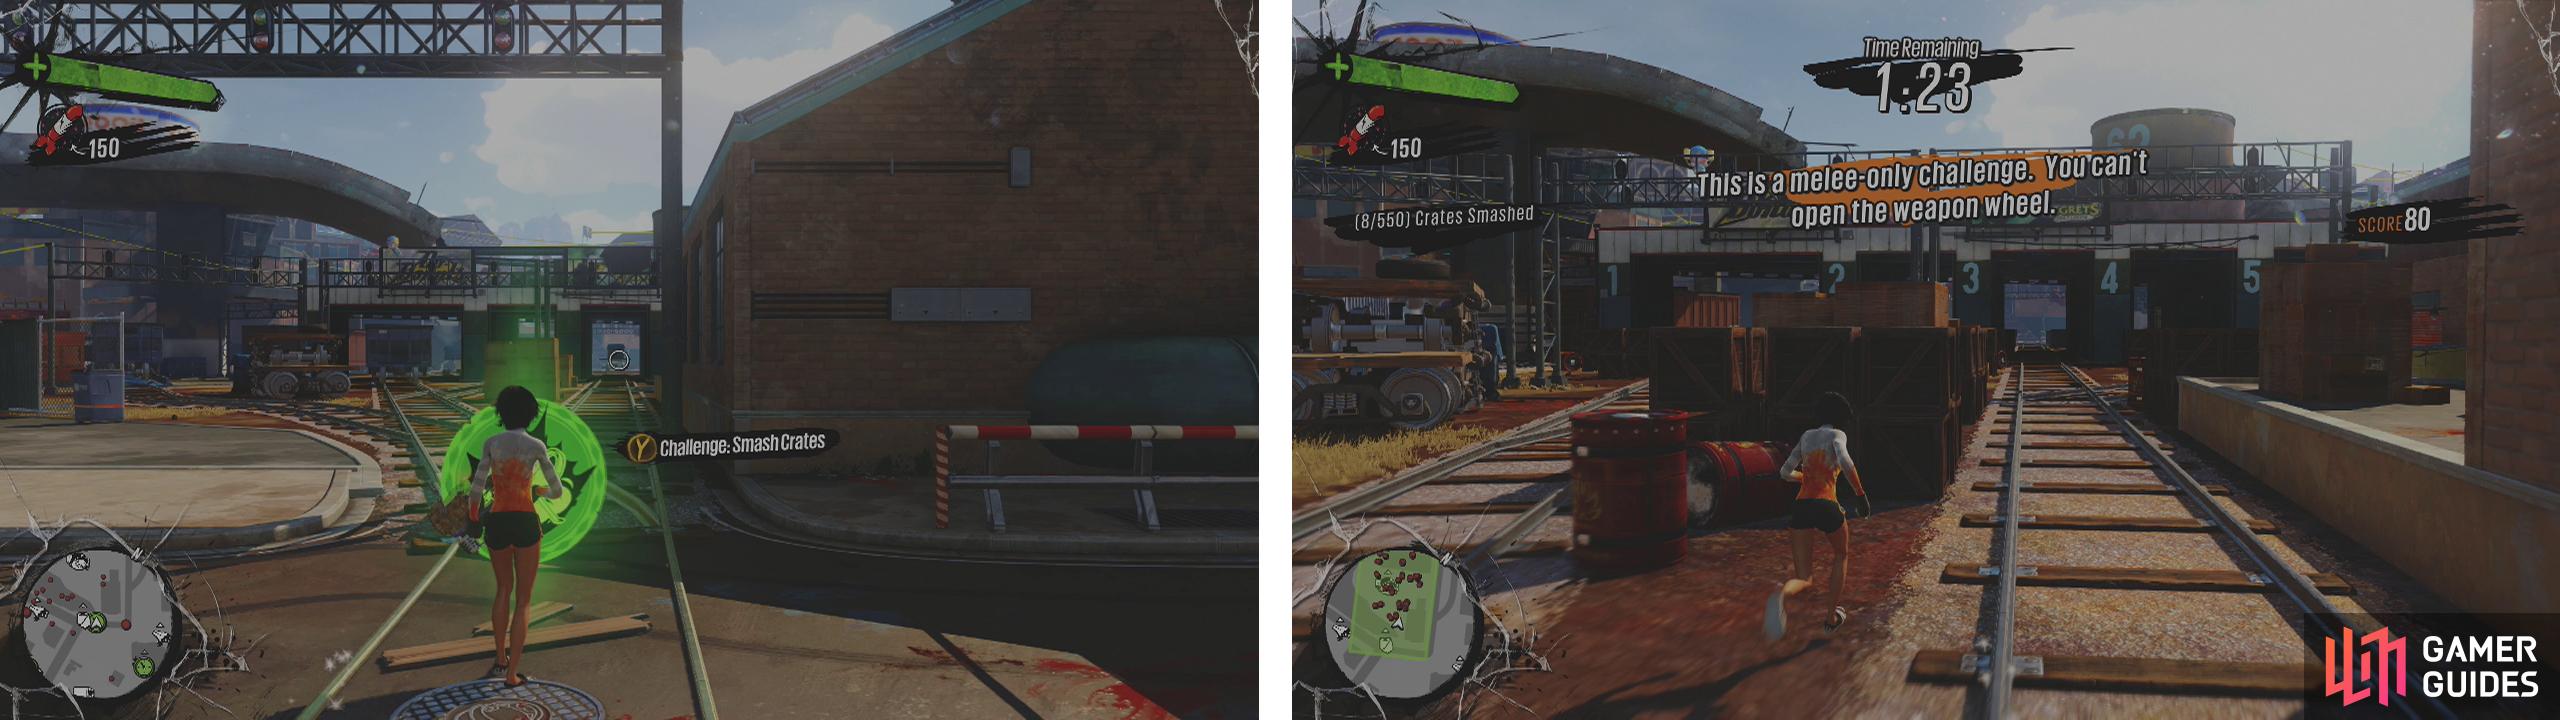 Start the challenge at the Train Depot (left). The key to success is to use the explosive barrels (right).